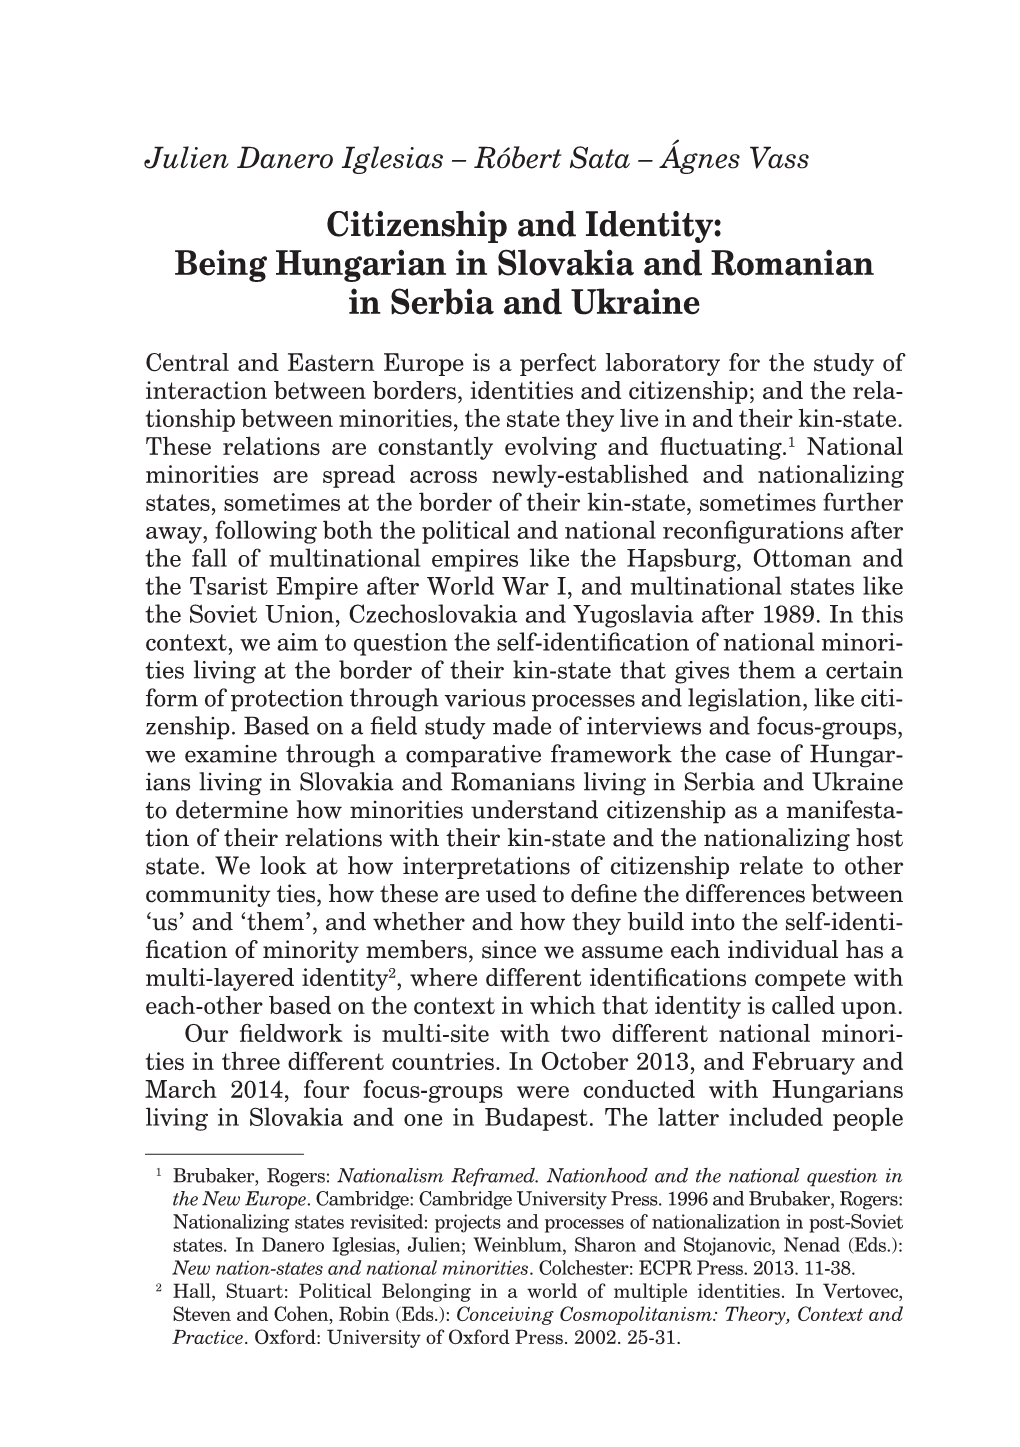 Citizenship and Identity: Being Hungarian in Slovakia and Romanian in Serbia and Ukraine